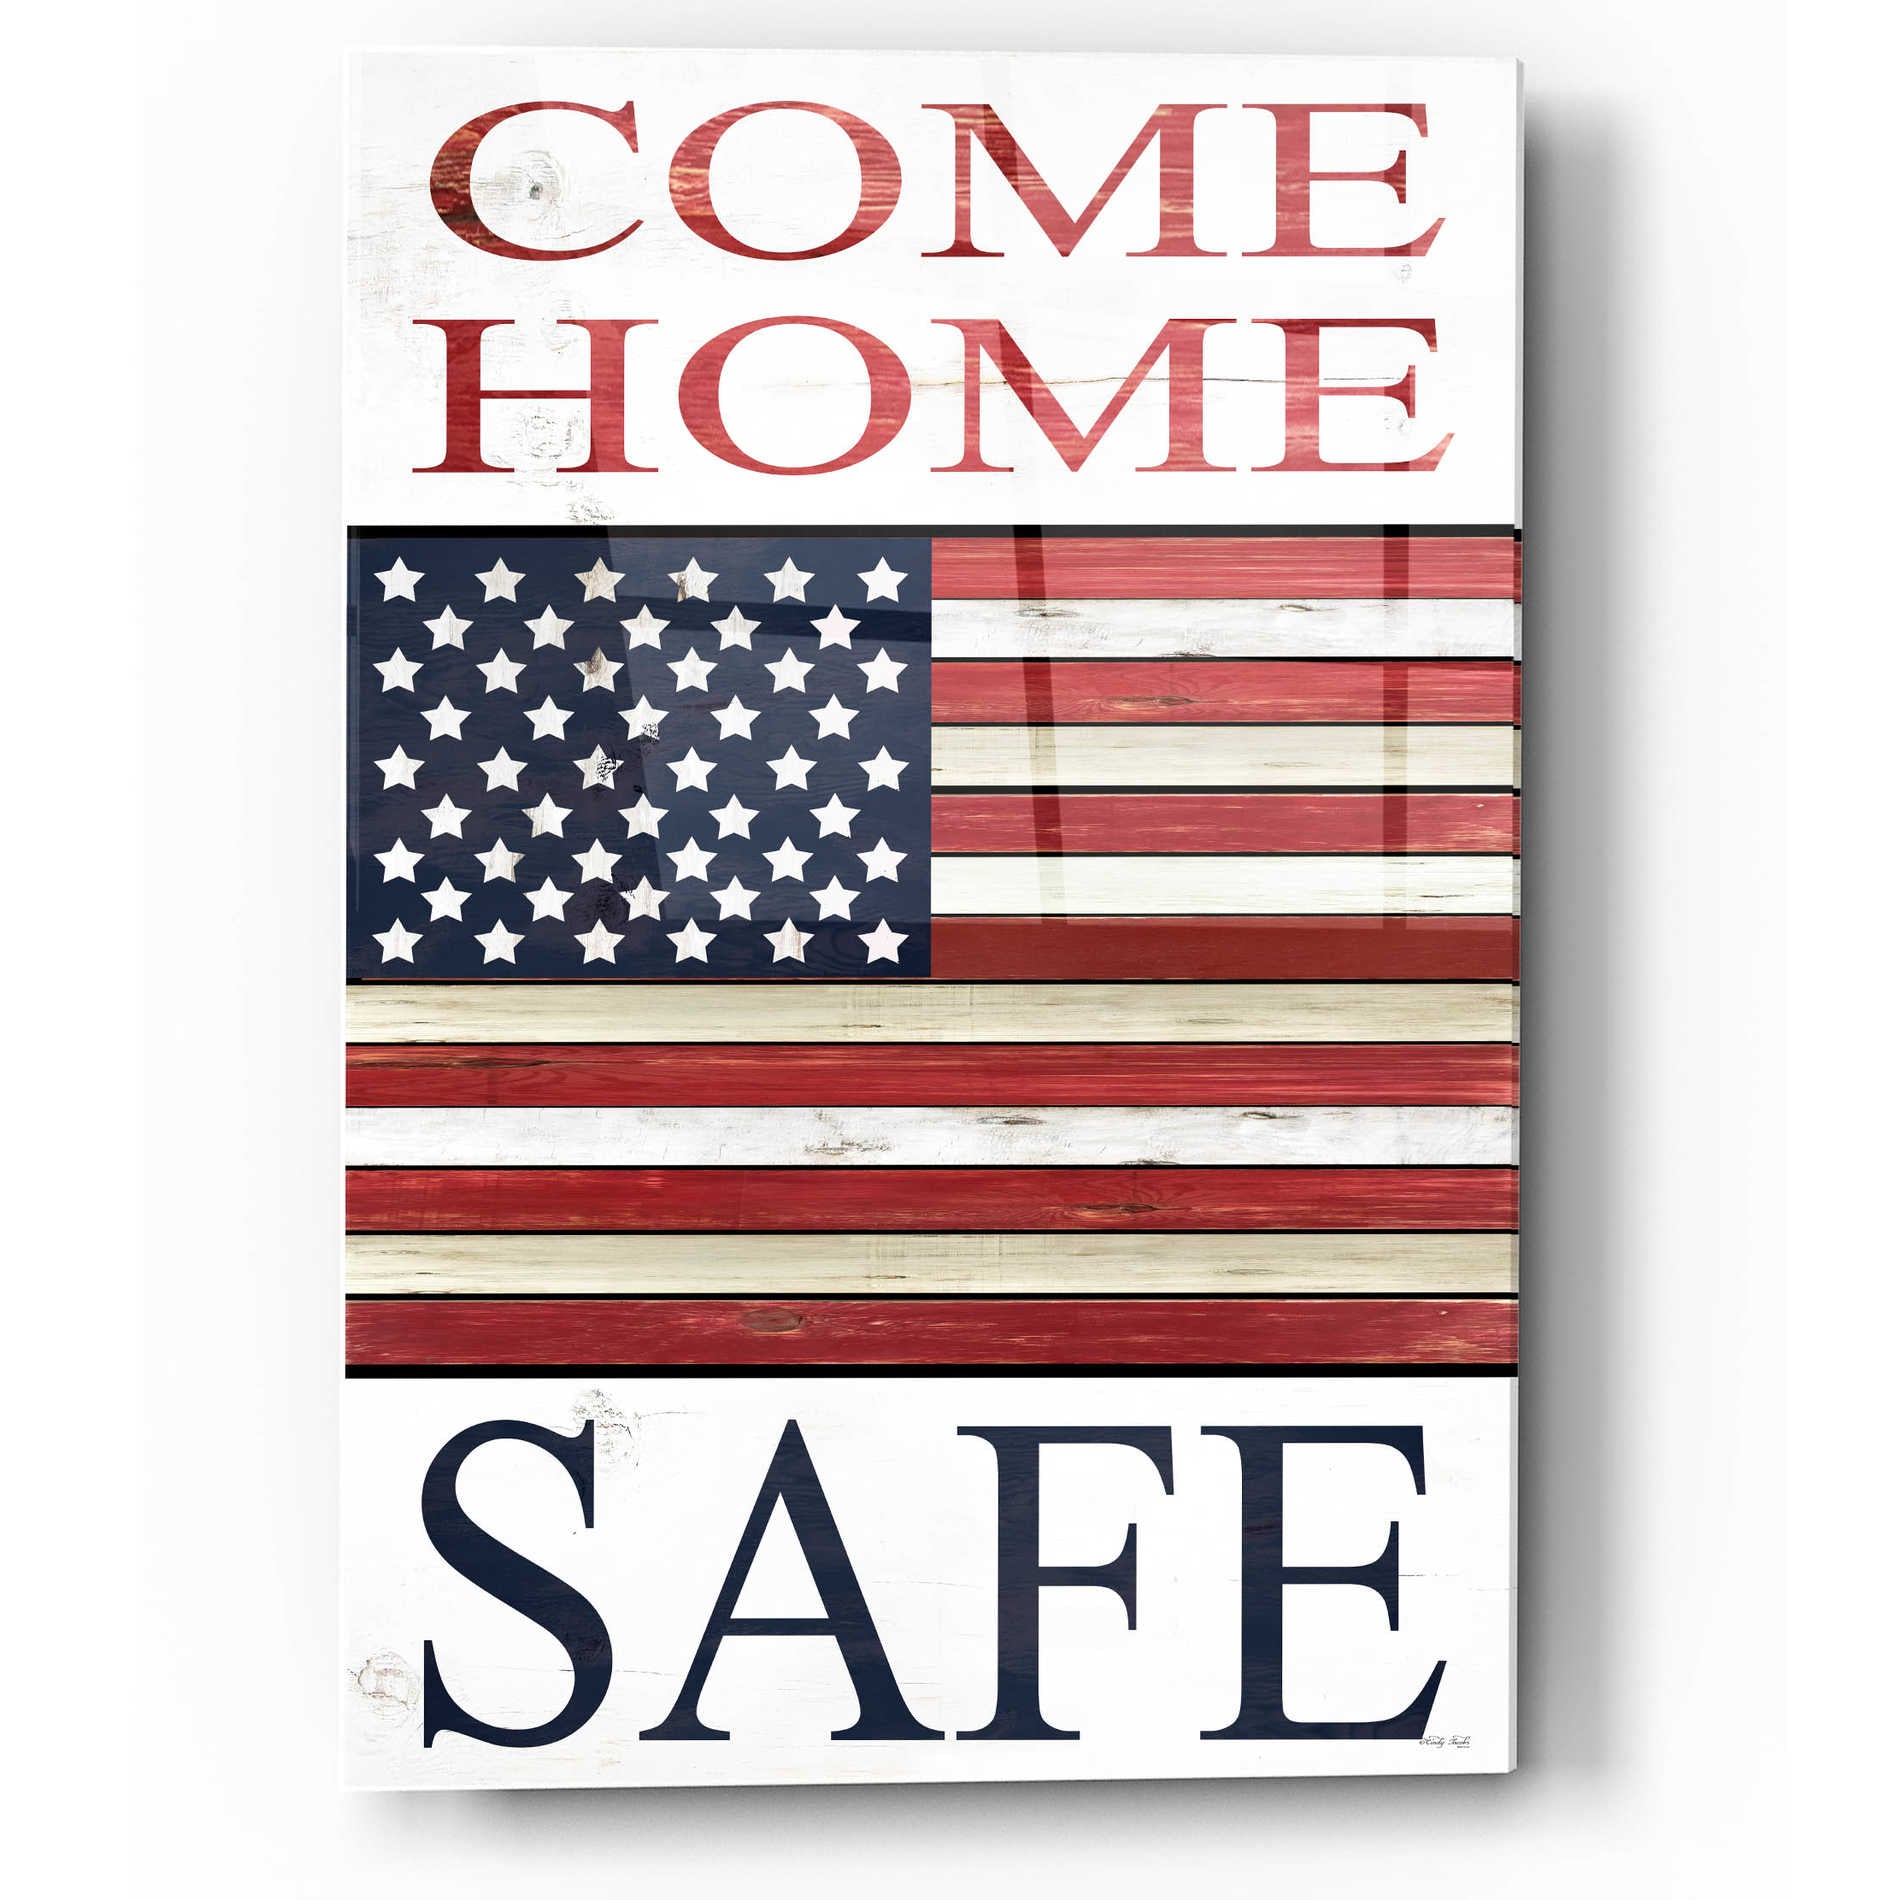 Epic Art 'Come Home Safe Patriot' by Cindy Jacobs, Acrylic Glass Wall Art